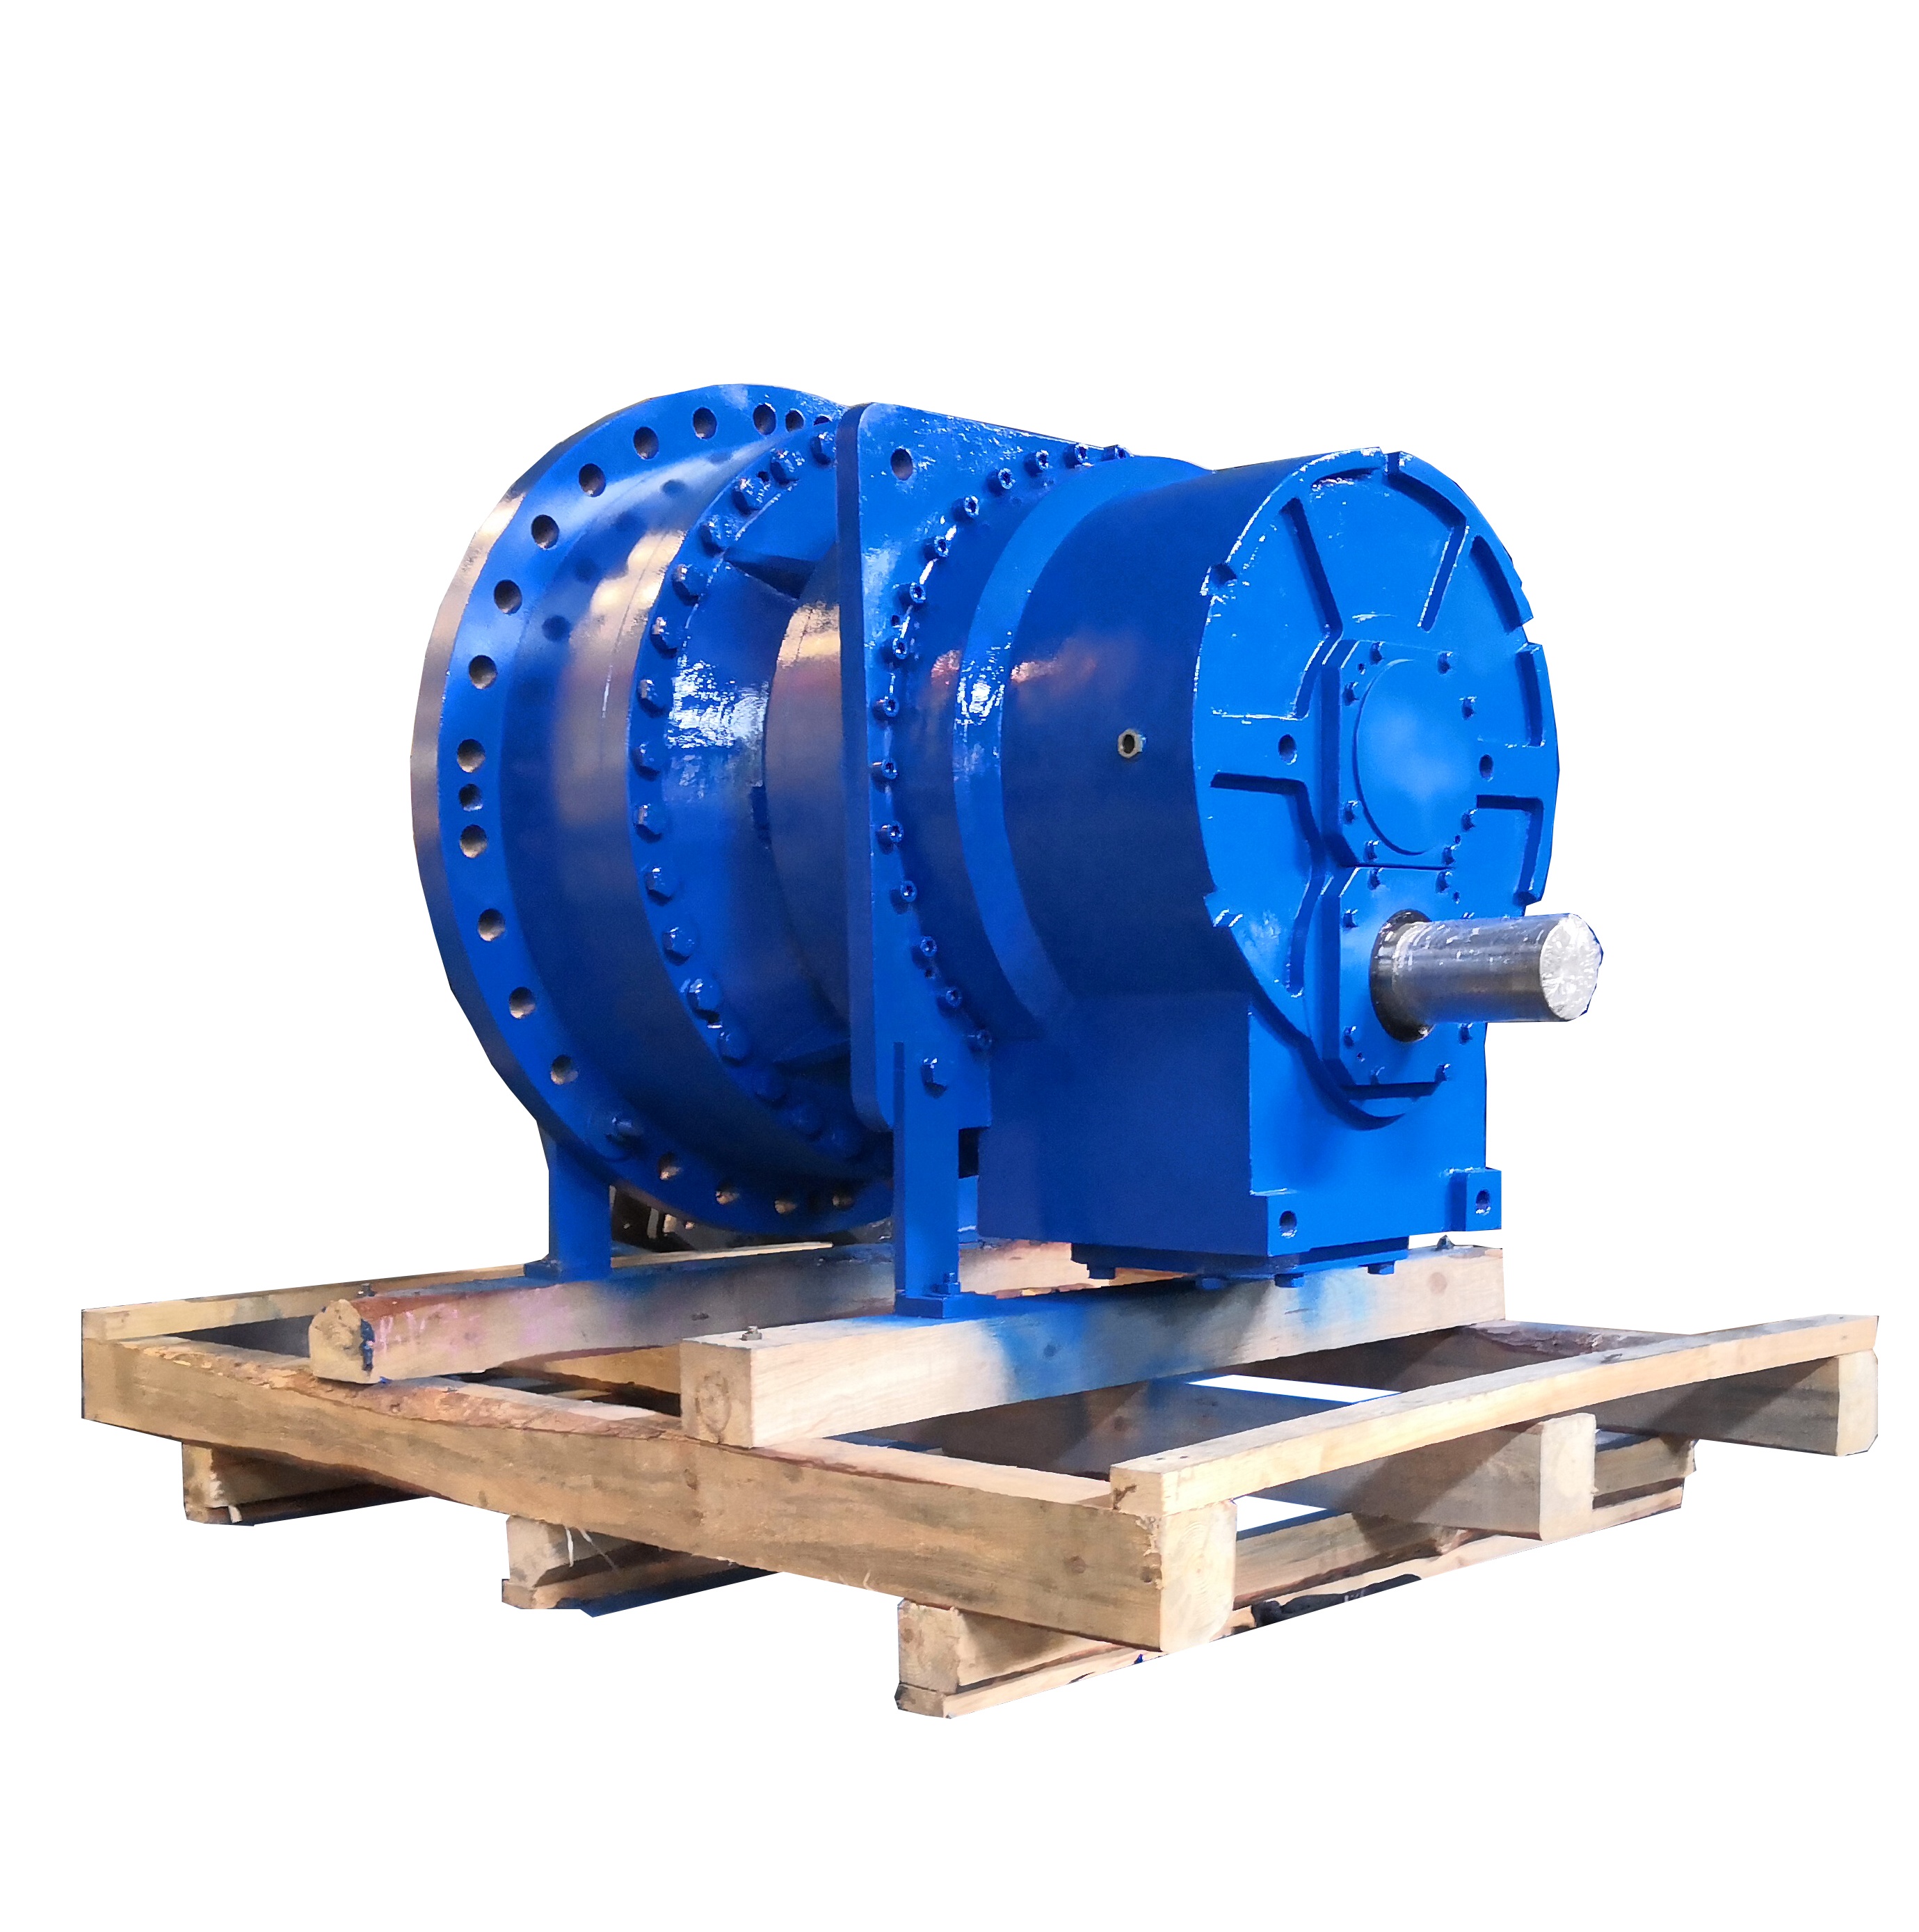 EVERGEAR P Series planetary high power industrial big milling gearbox 200kw